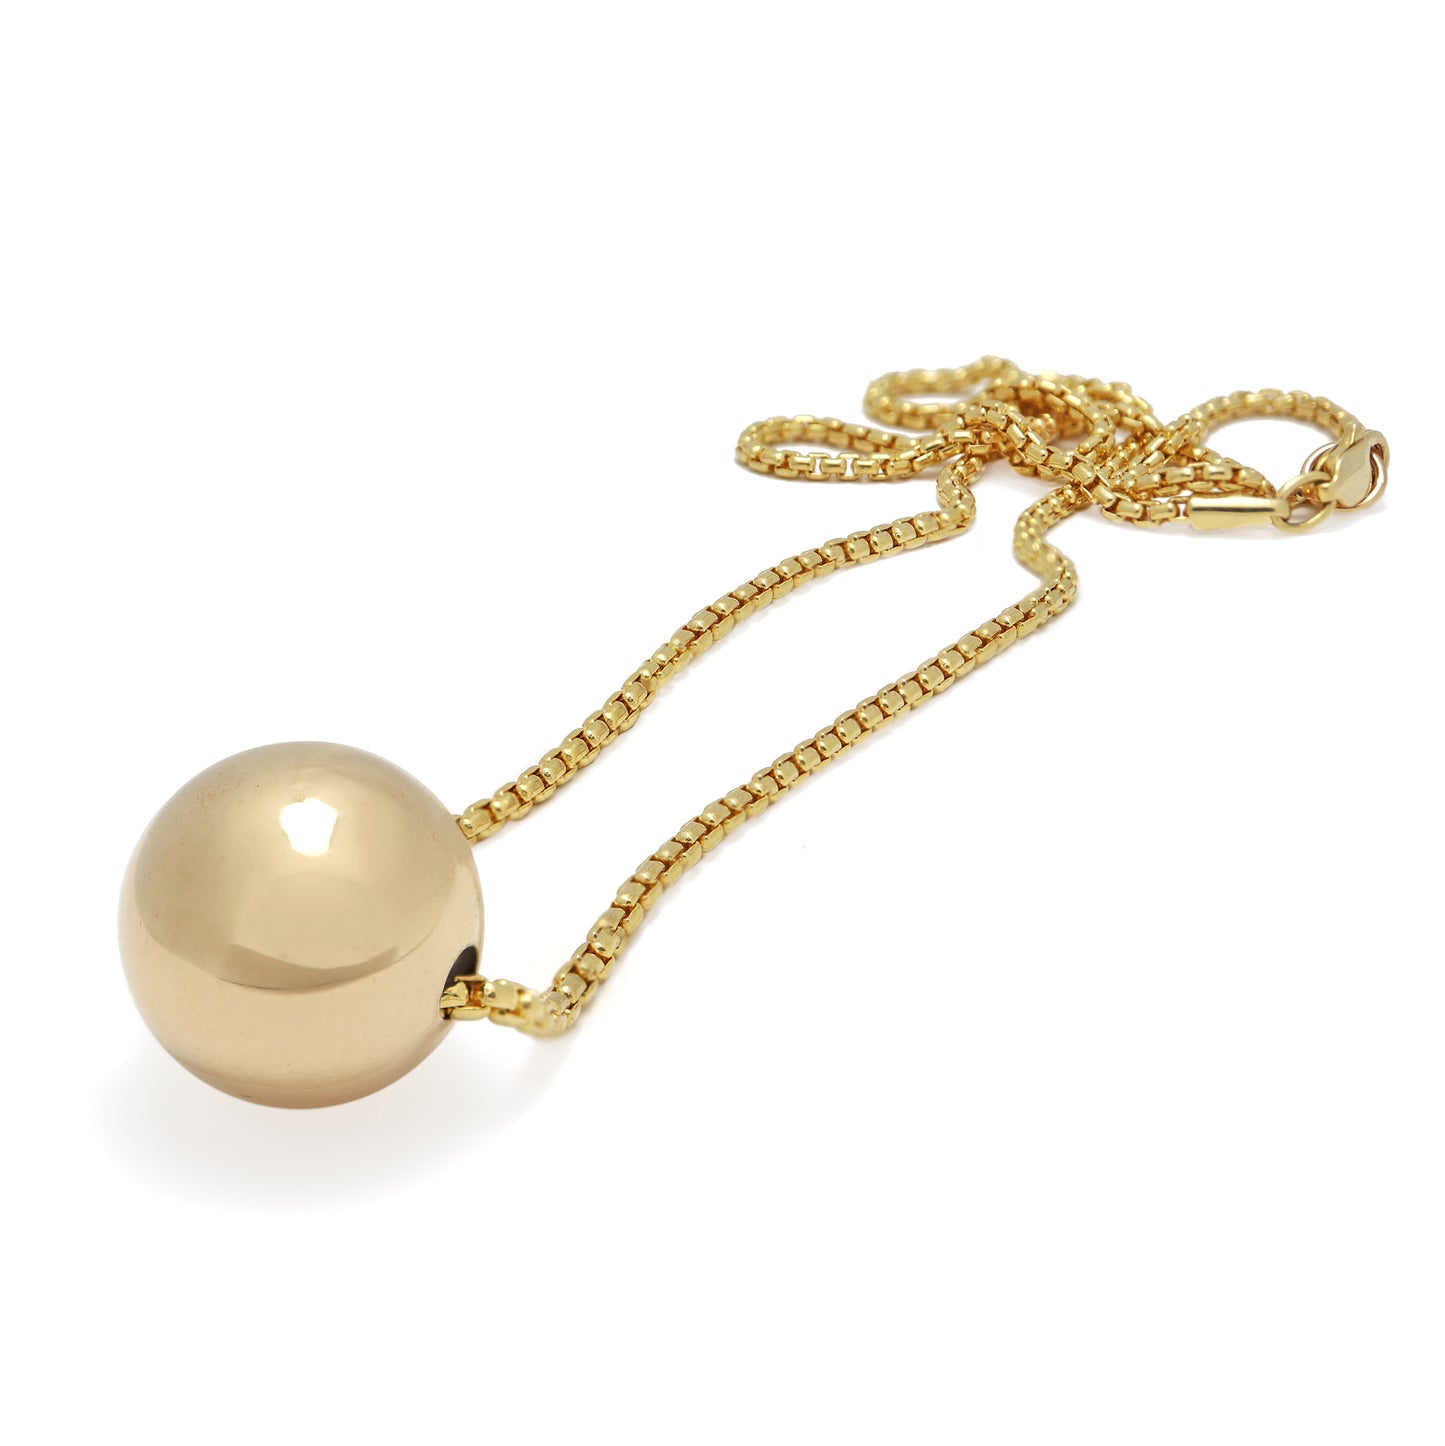 Sphere Necklace Gold Sphere Necklace Erica Leal Jewellery Erica Leal Jewelry Vancouver Jeweler Vancouver Jeweller Handmade Necklace Handmade jewellery 